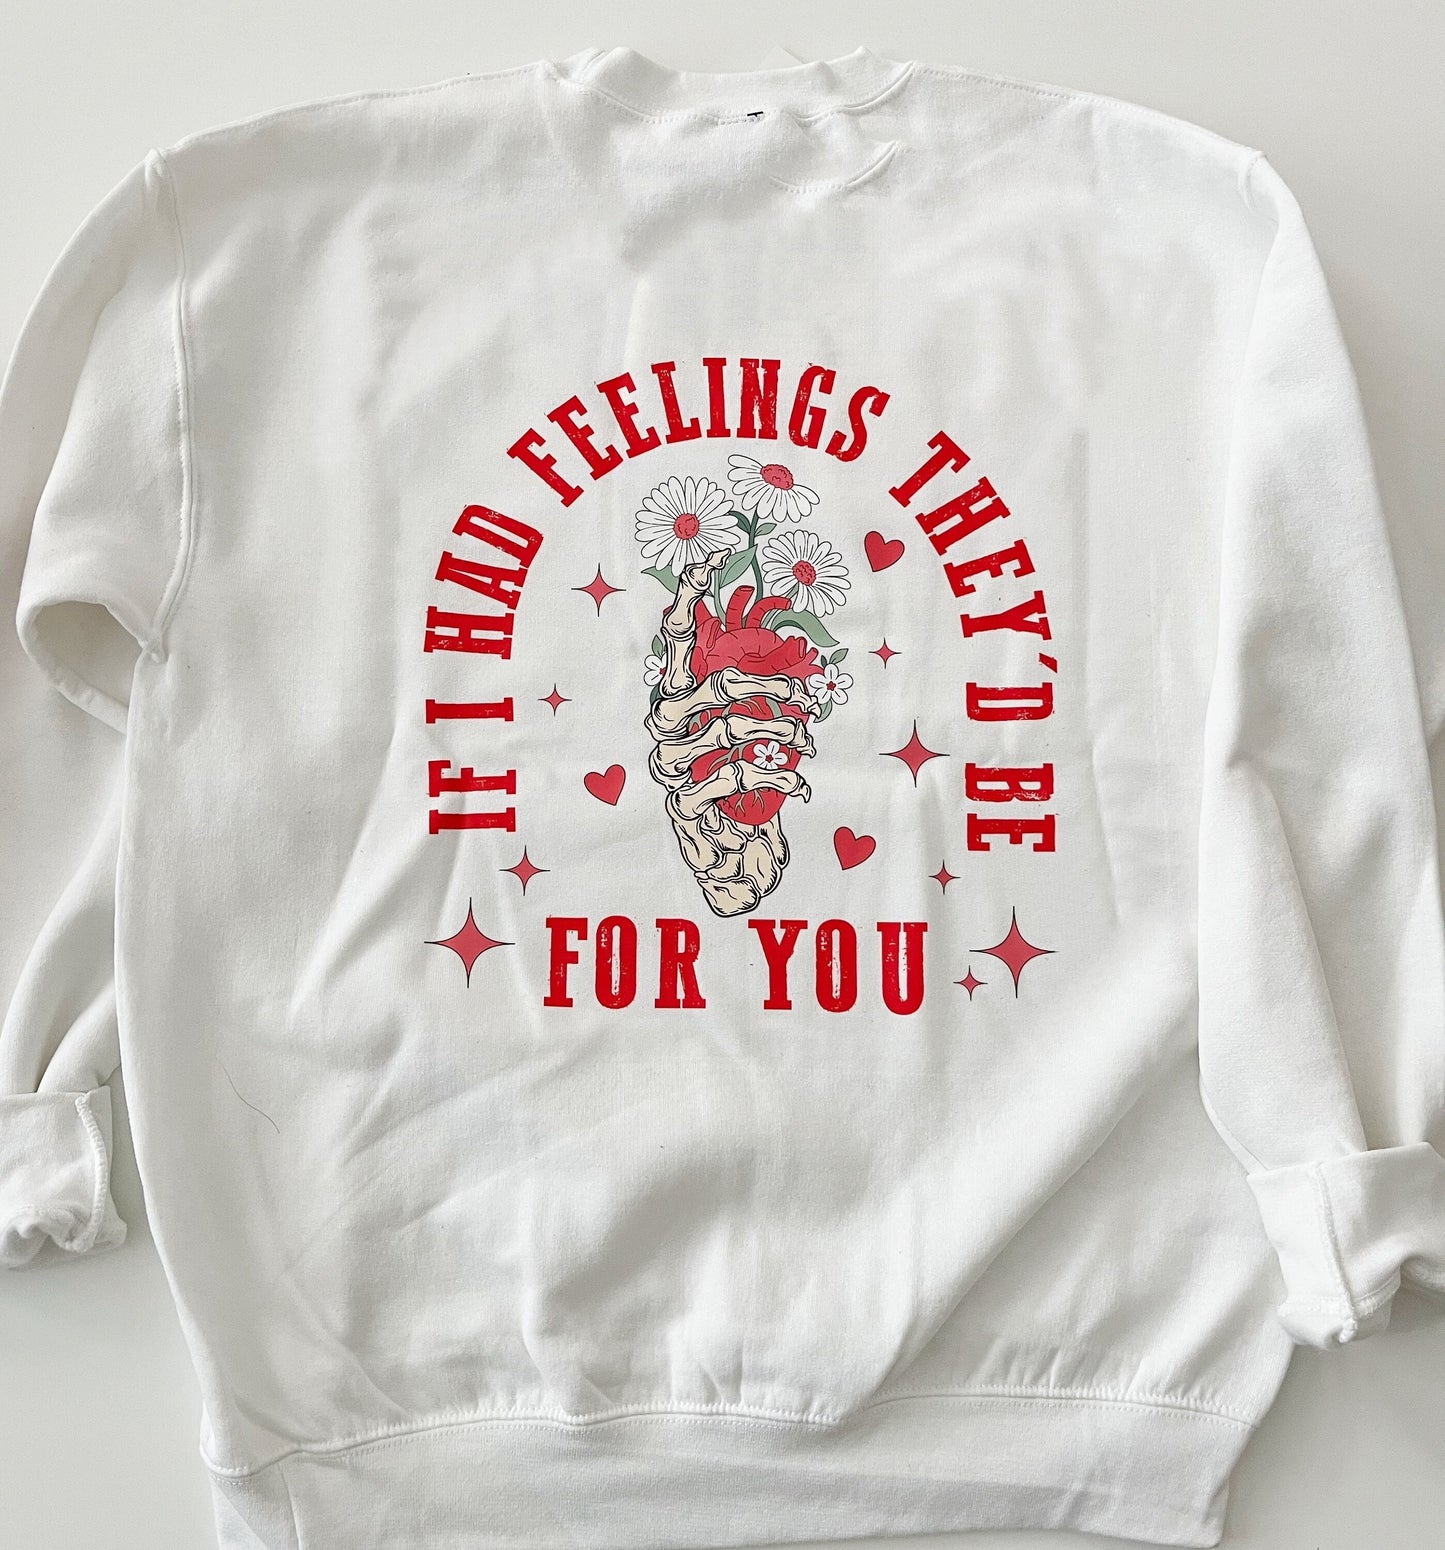 Graphic Sweatshirt, Valentine Sweatshirt, White Crewneck, Women's Crew, Cozy Clothing, Love, Woman, Cute Tops, Gifts For Her, Wife Gifts